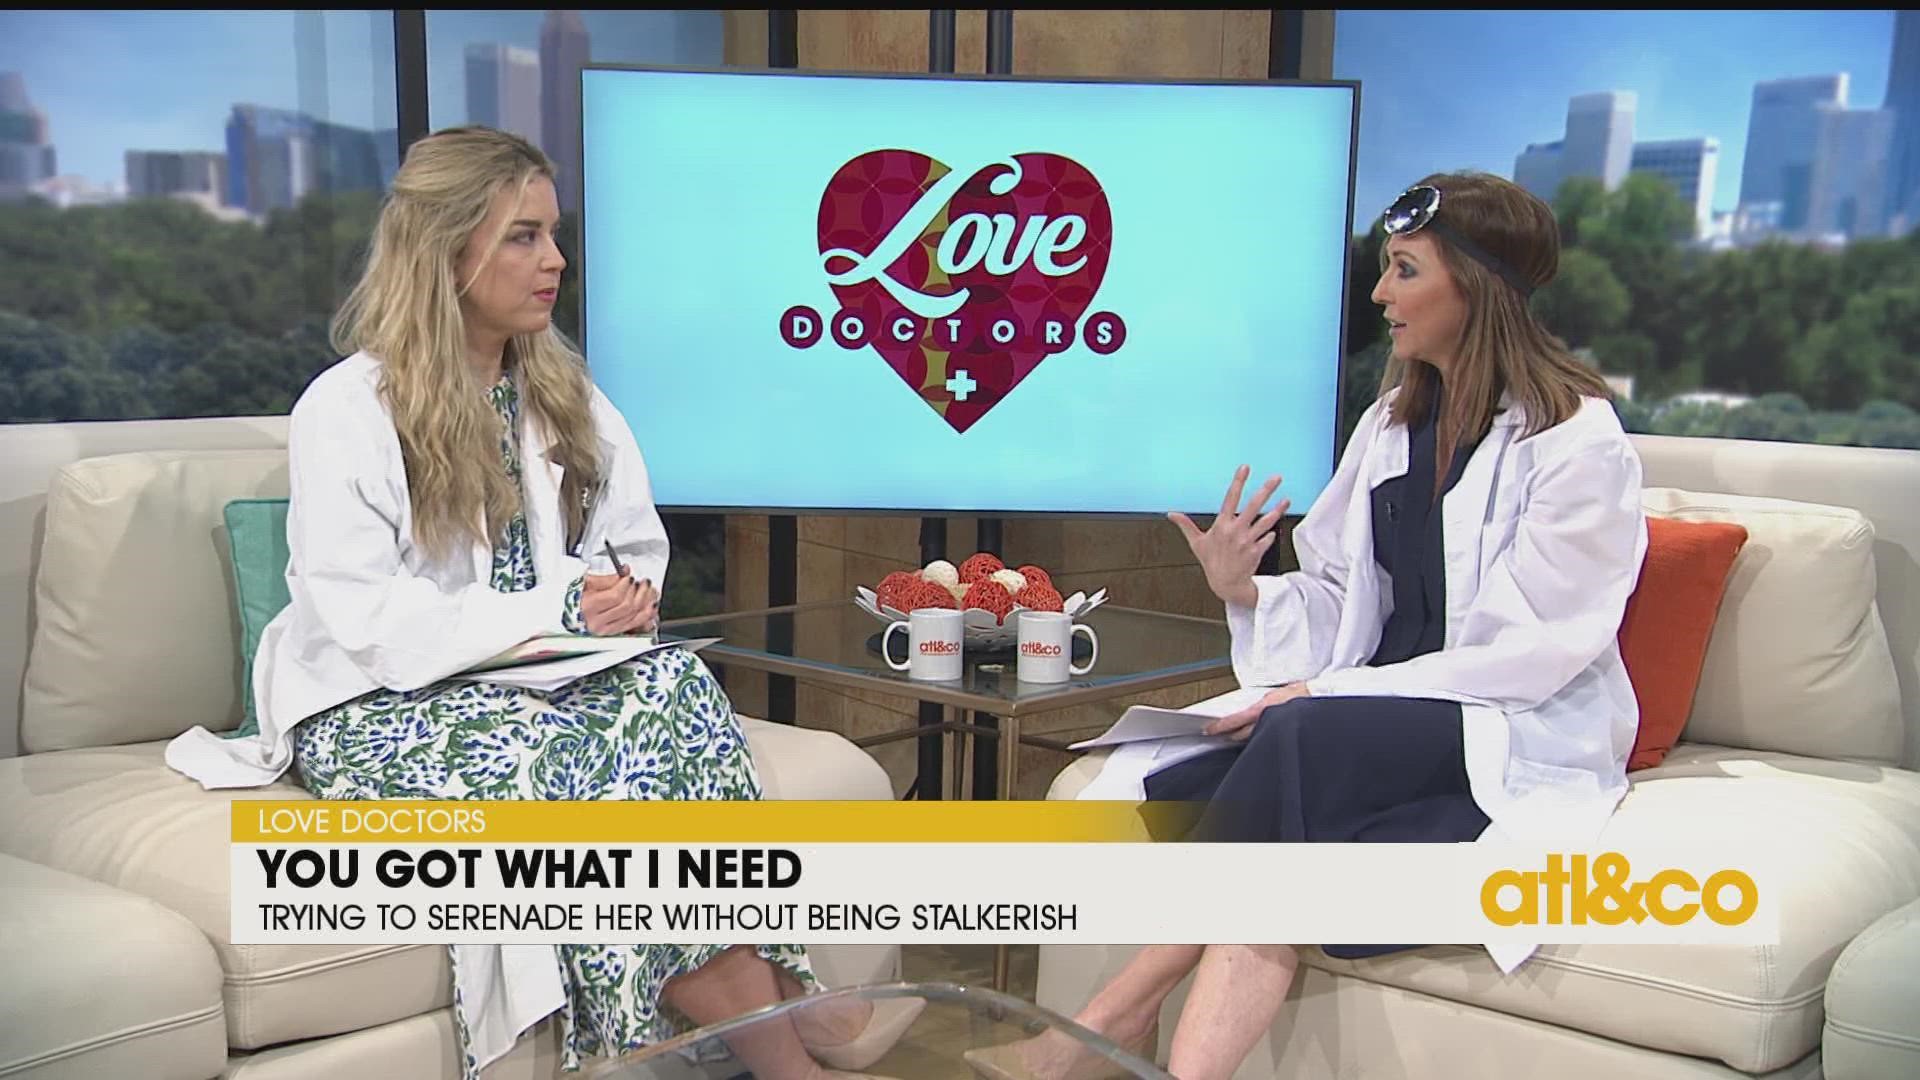 Are you ready for new dating adventures but don't know where to turn? Let Love Doctors Christine Pullara and Cara Kneer be your guides.